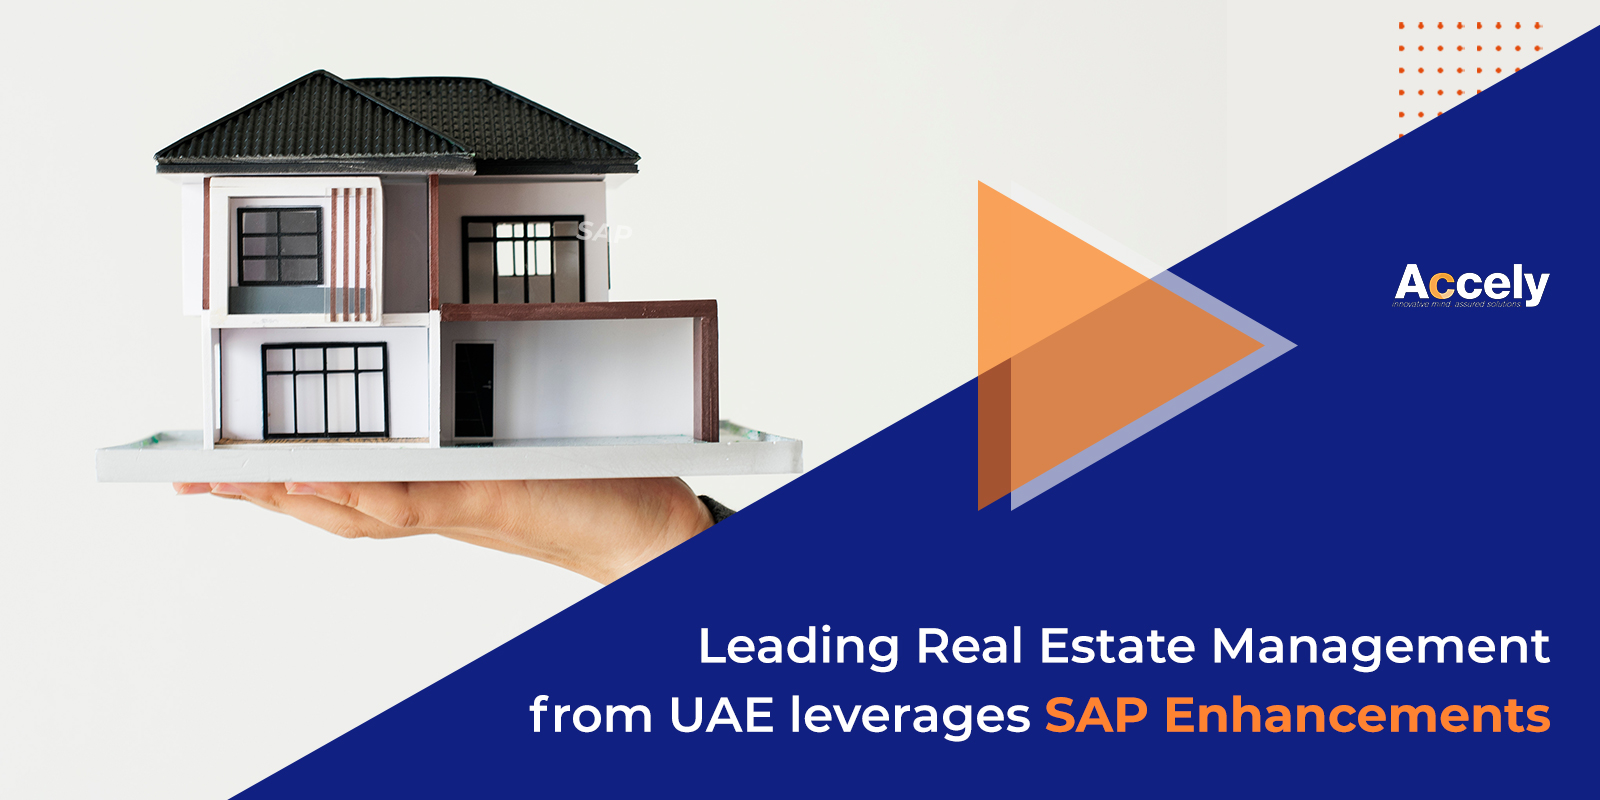 Leading Real Estate Management from UAE leverages SAP Enhancements